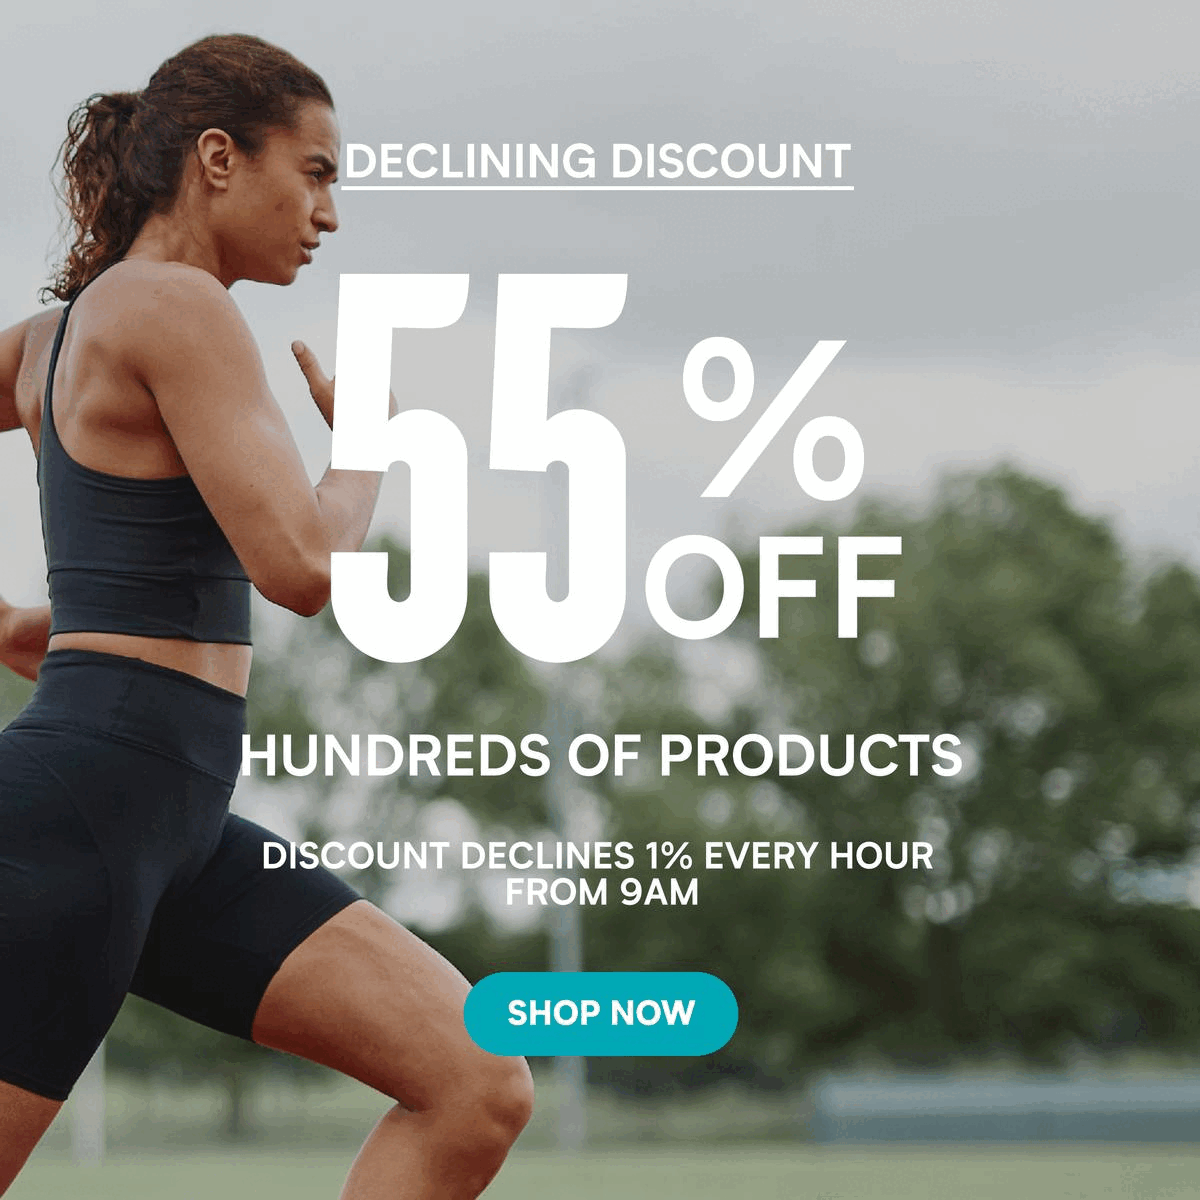 55% OFF selected products...for now...